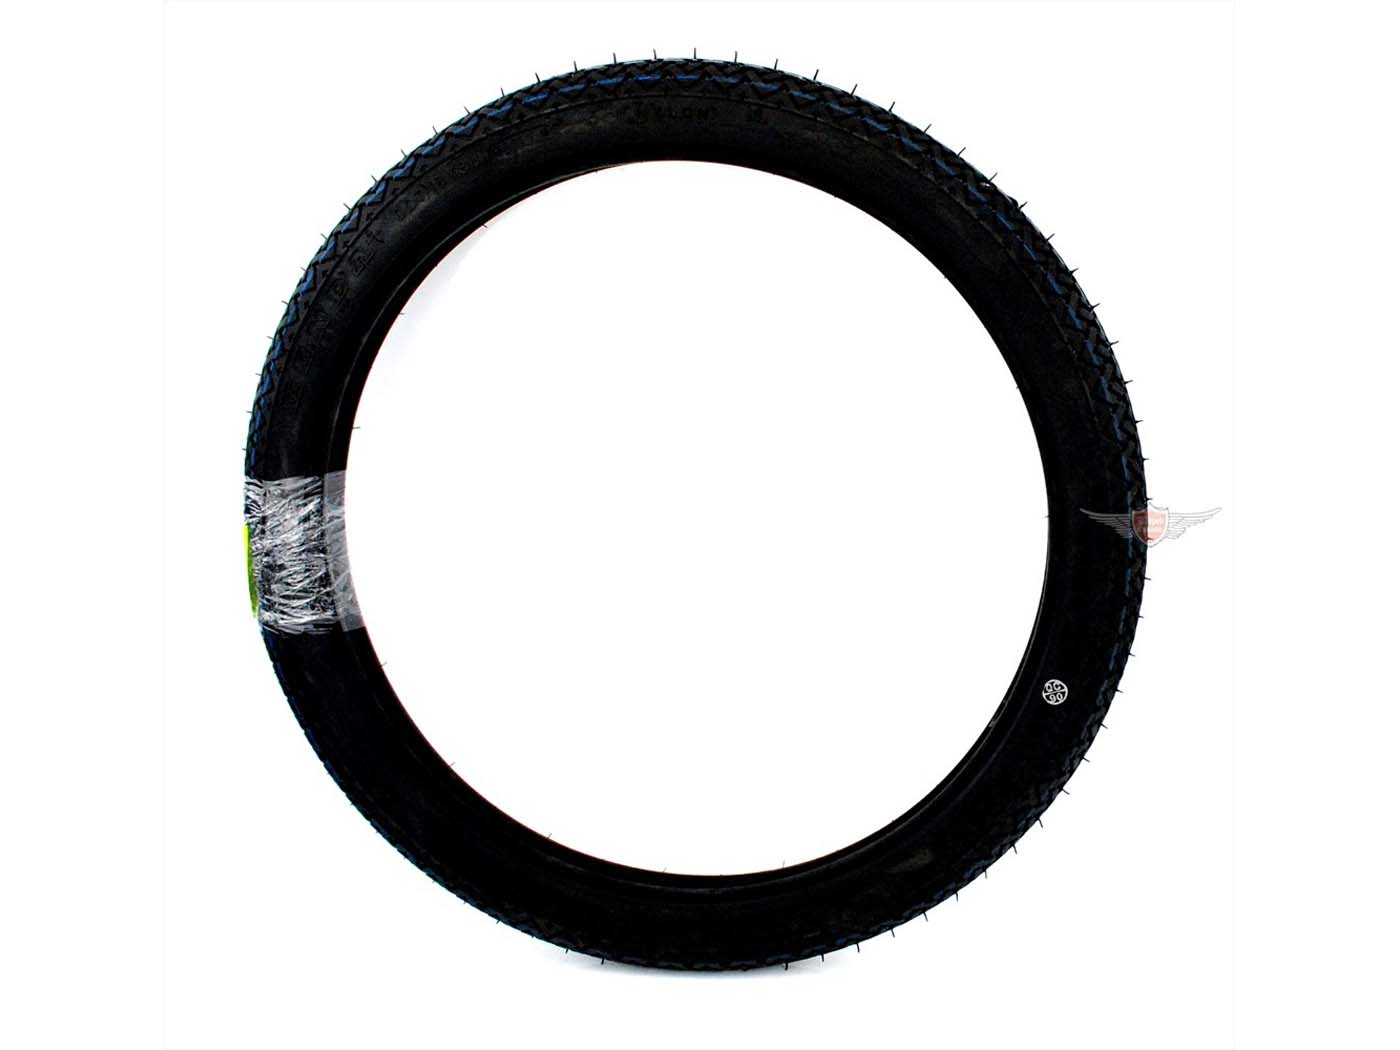 Tires Kenda 2 .00 X 17 Inch For Peugeot 103 Moped Moped